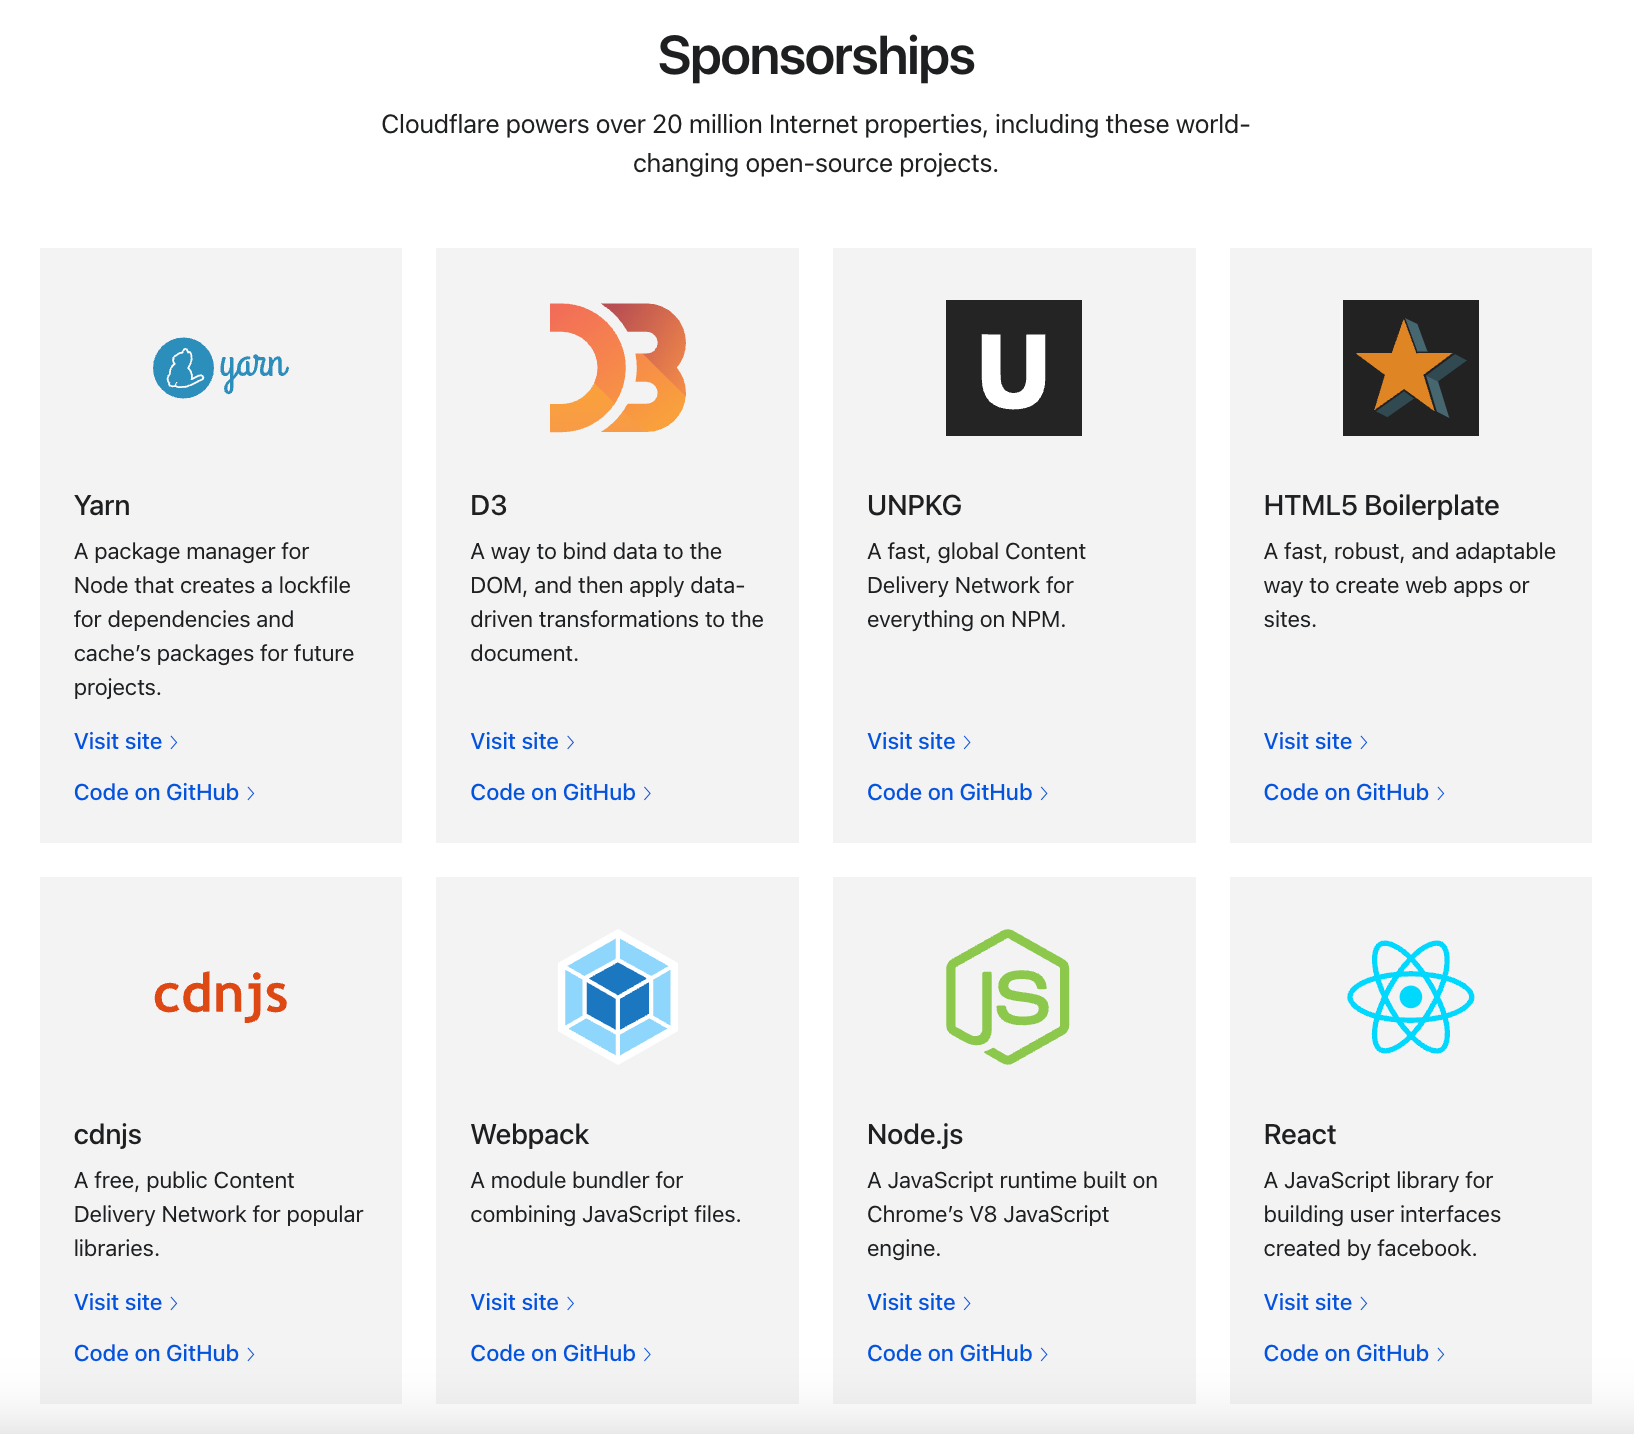 Launching our new Open Source Software Sponsorships Program